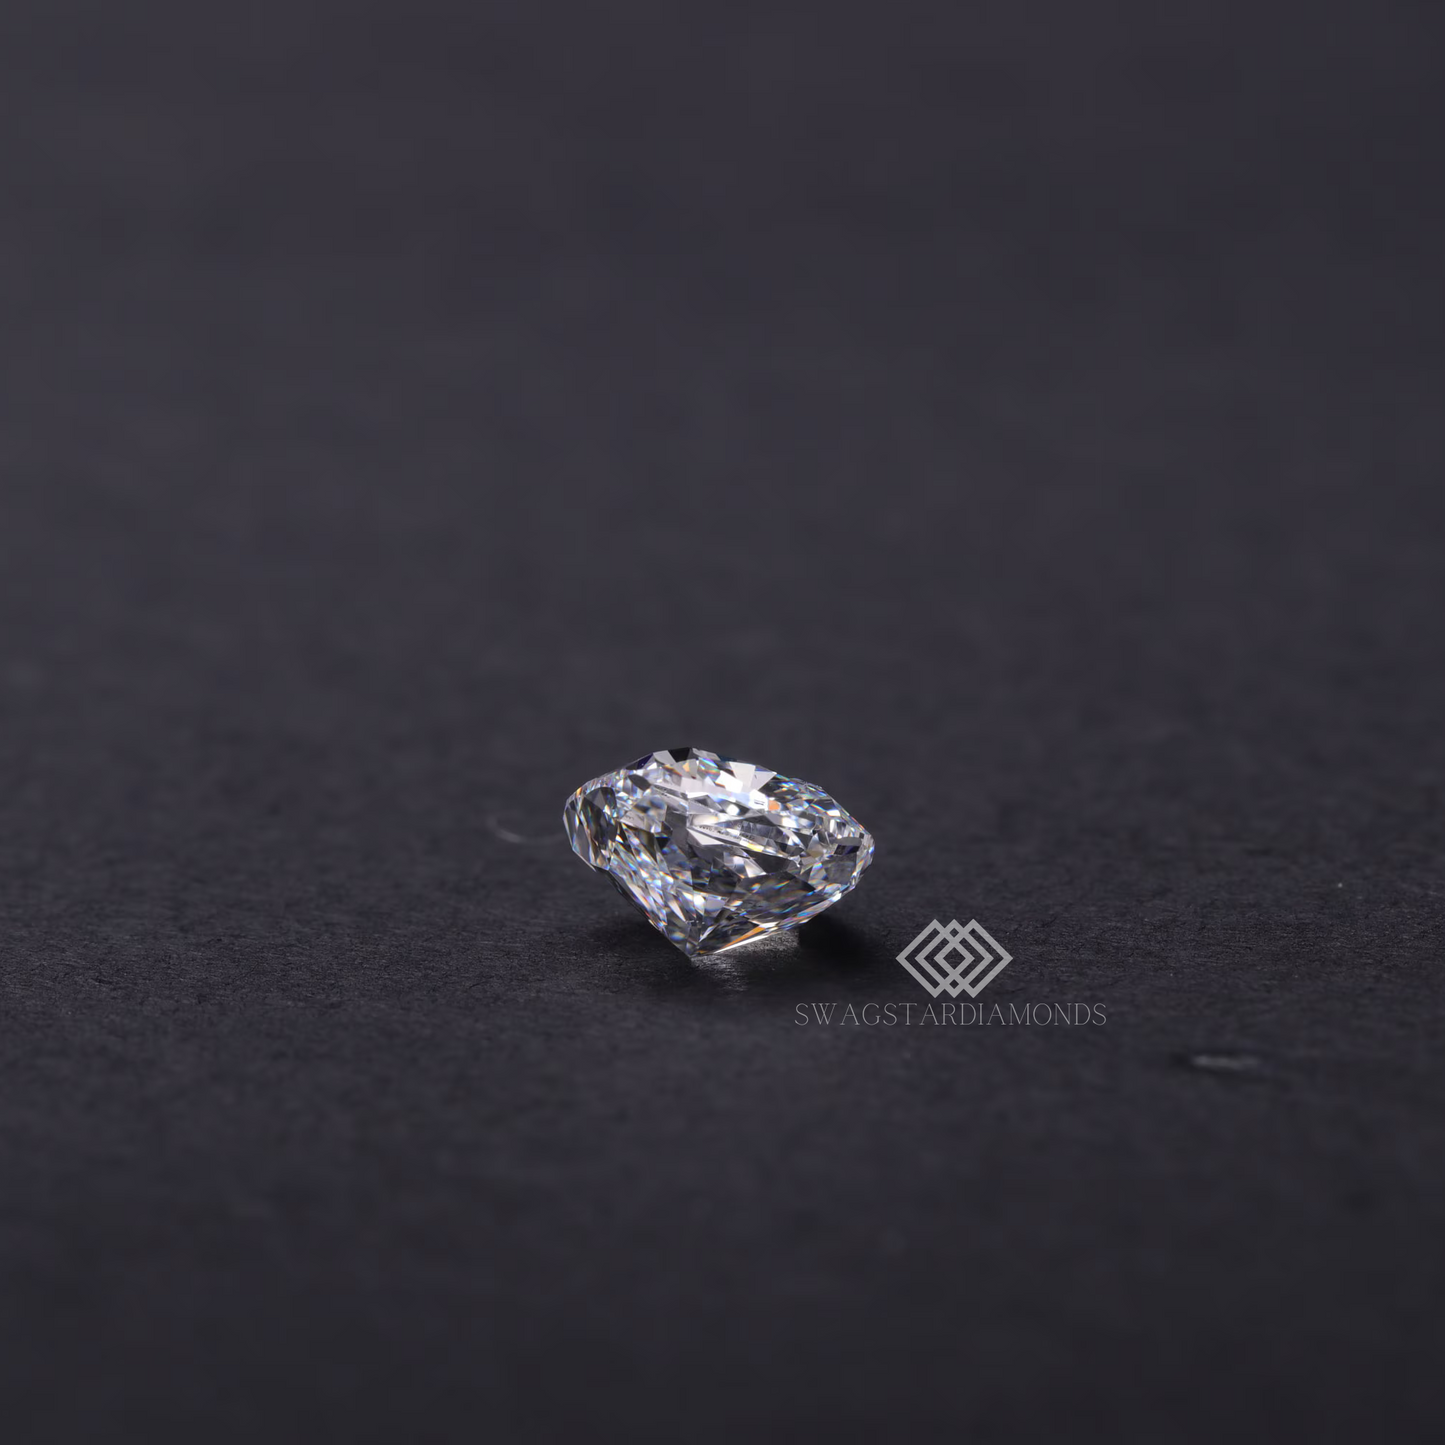 Cushion Shape Diamond With Lab-Grown & Natural Diamonds, Jewelry By Leading Manufacturer From Swagstar, Surat. Explore Wedding, Engagement, Eternity Rings, Earring & Studs, Bracelets In 10k, 14k, & 18k Gold Varieties, Including White, Yellow, Rose Gold.